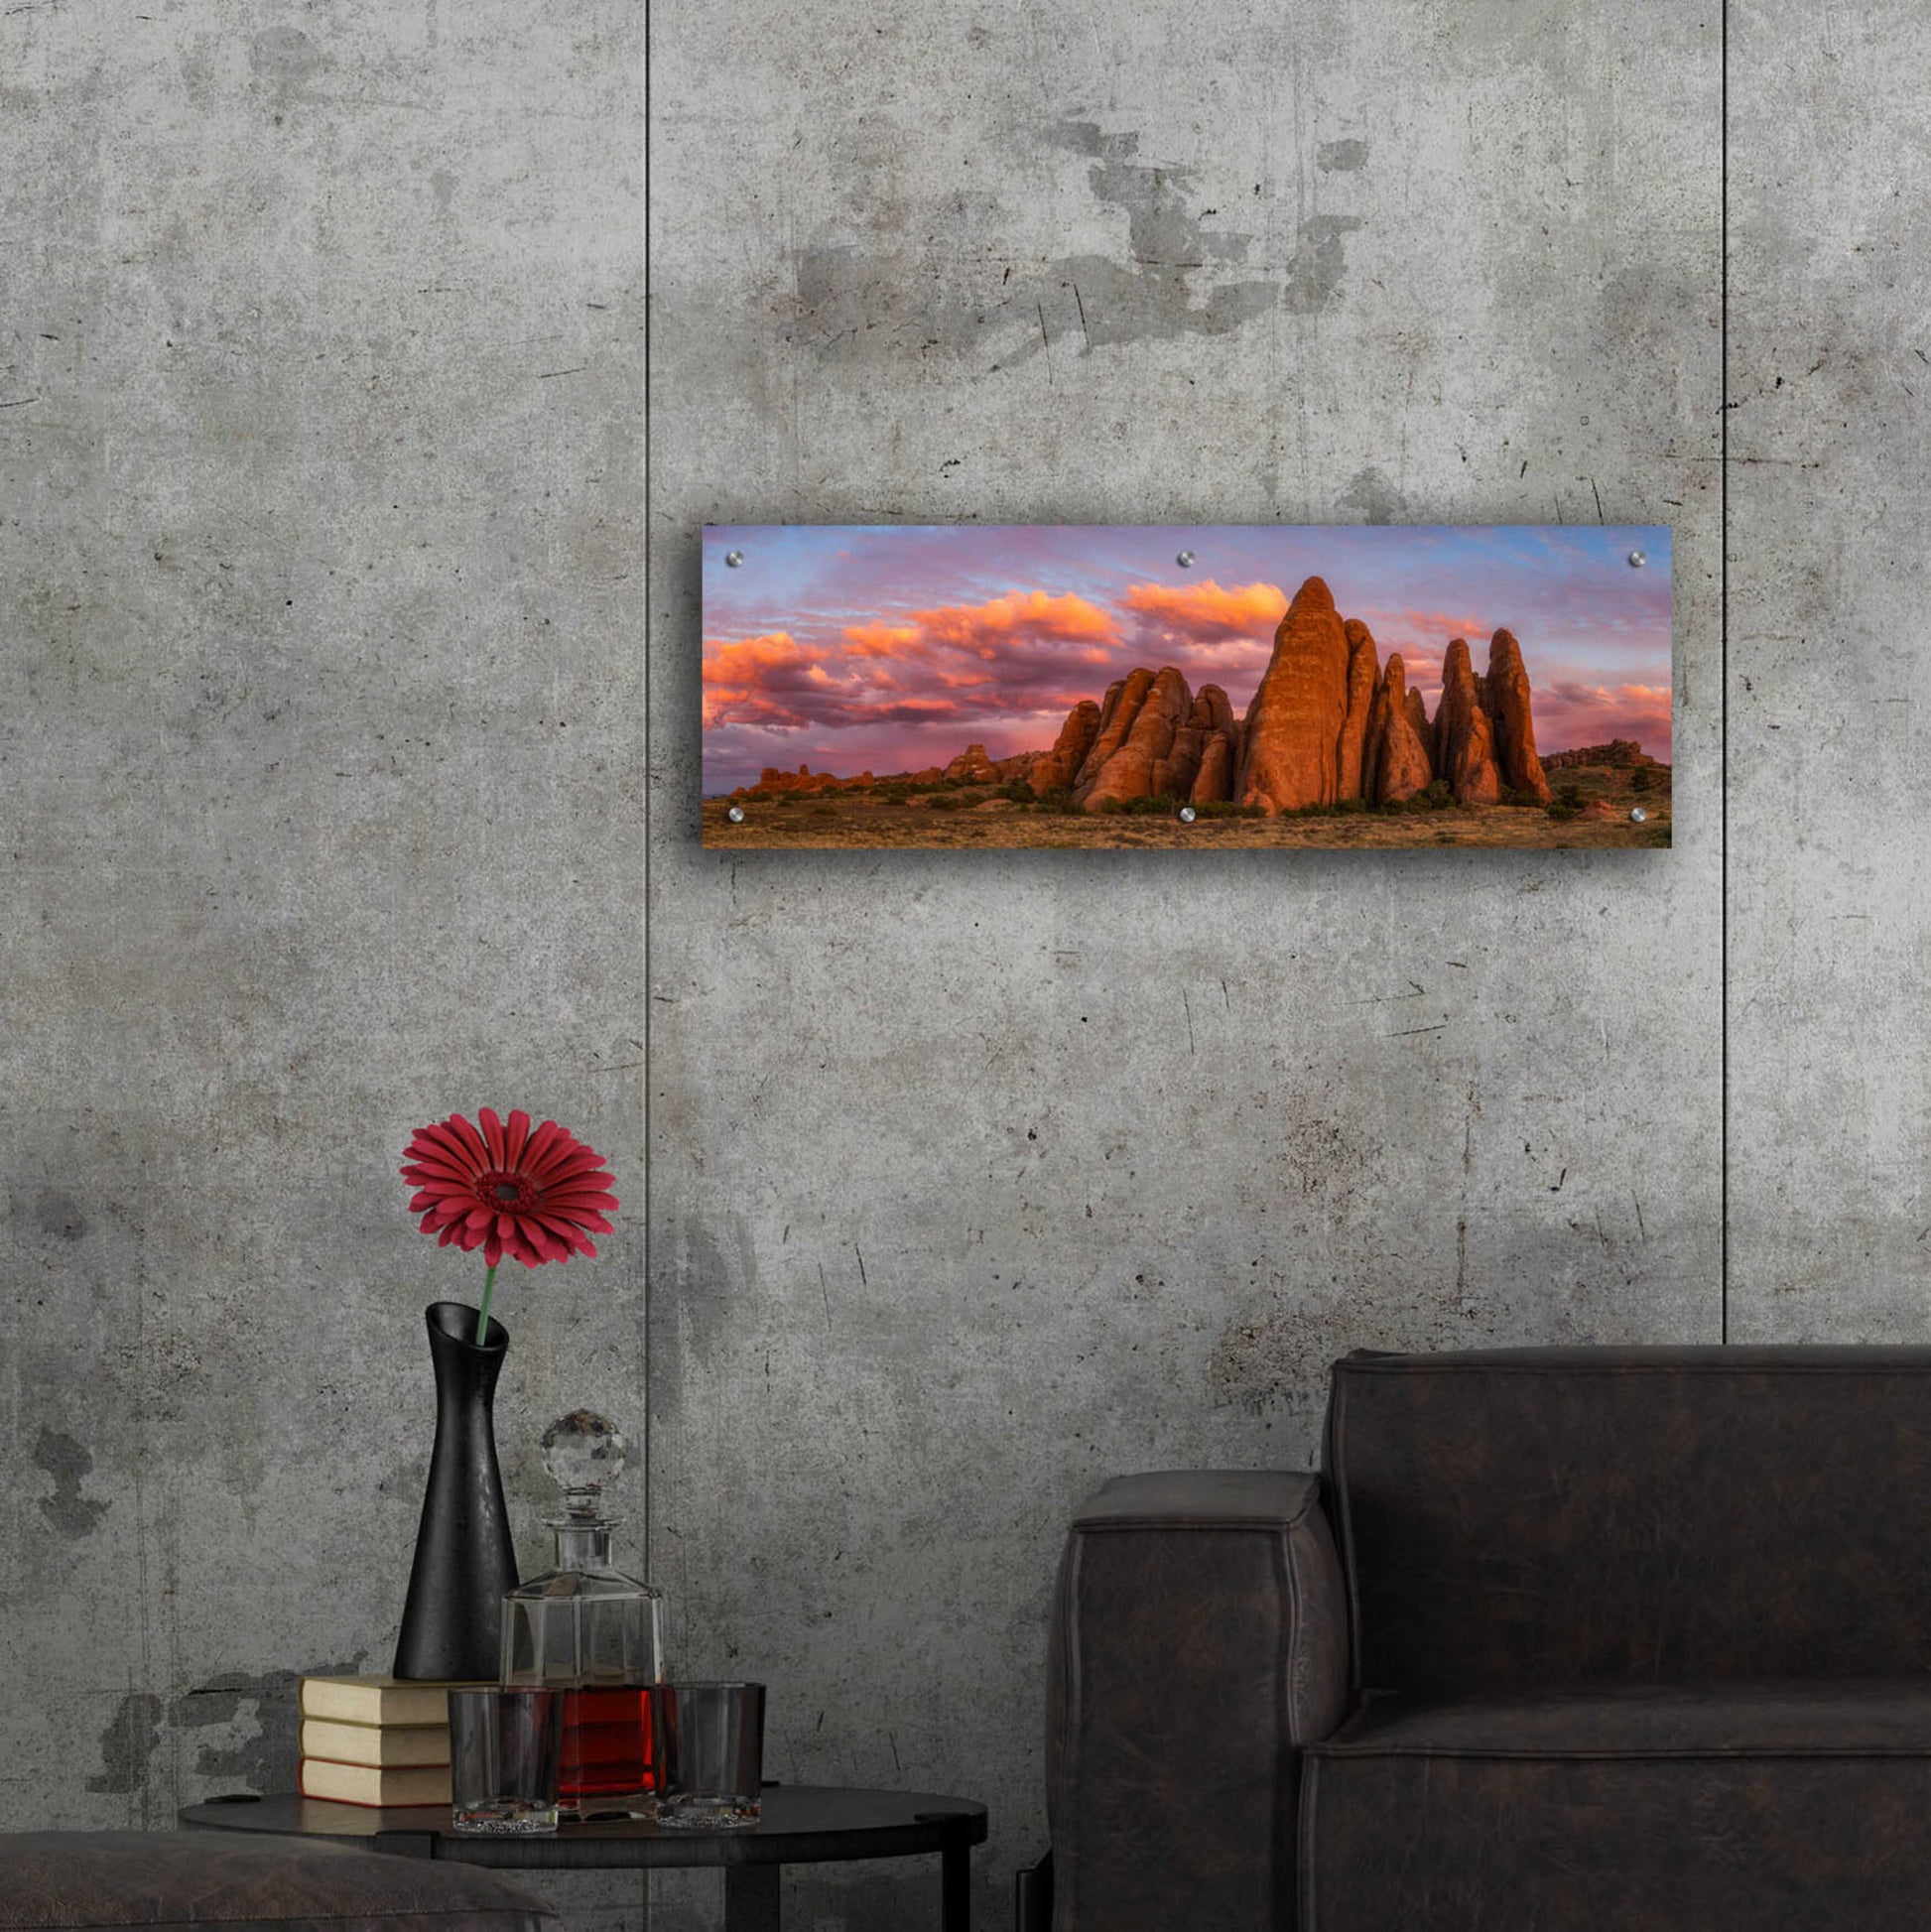 Epic Art 'Sunset at the Fins - Arches National Park' by Darren White, Acrylic Glass Wall Art,36x12